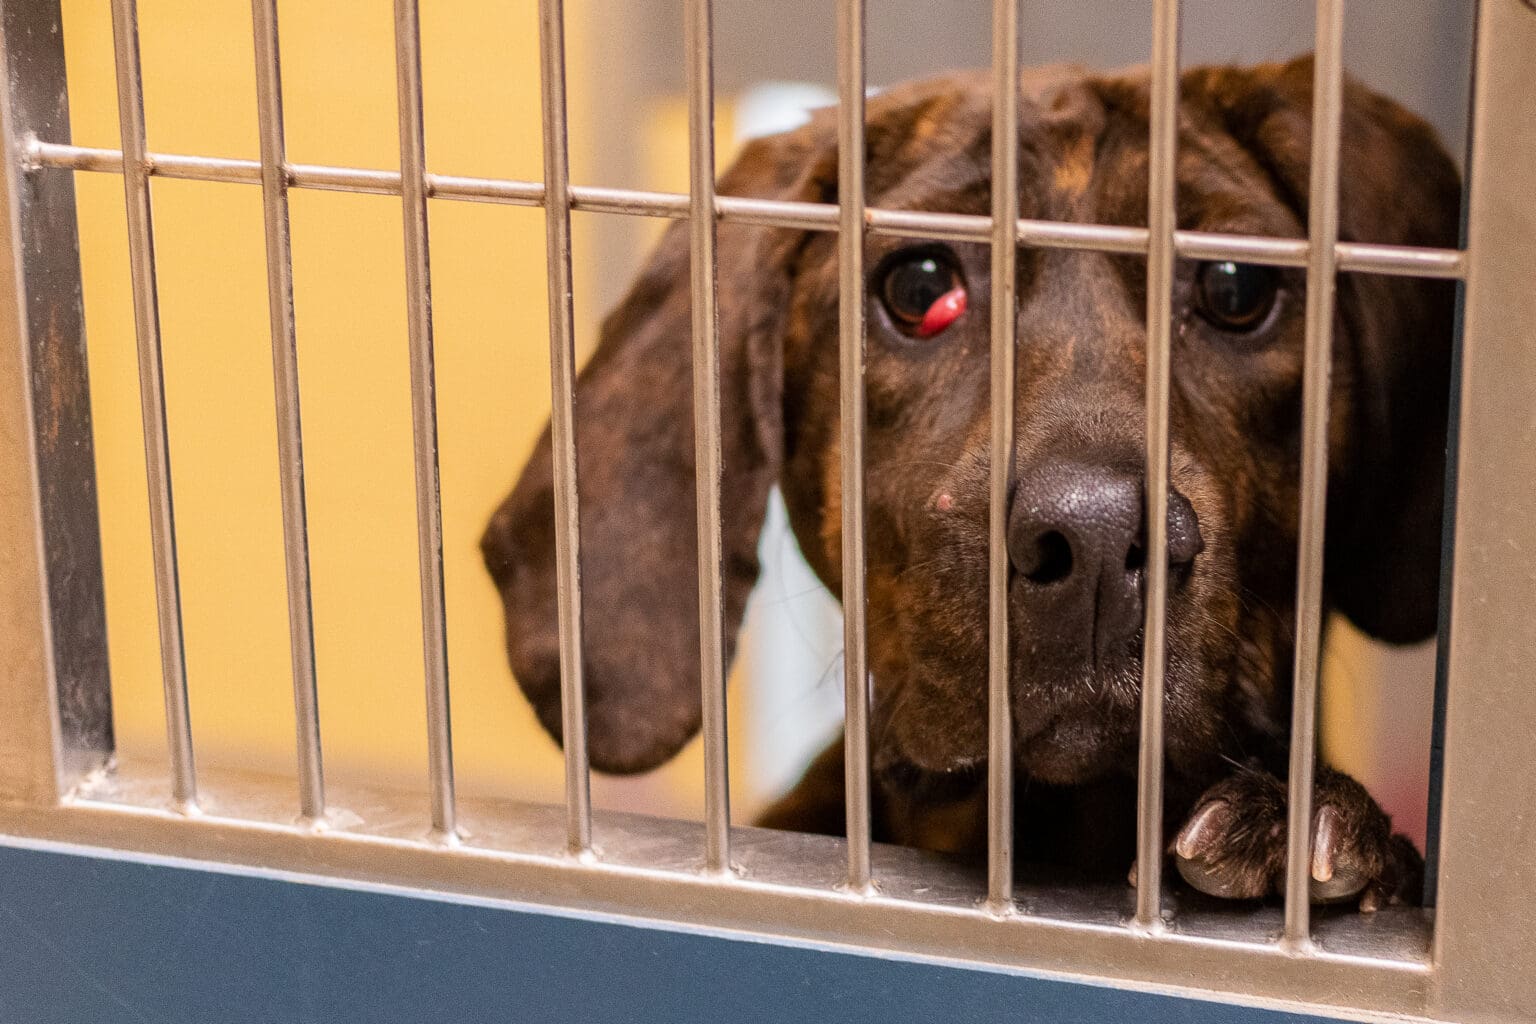 Pogo, a hound mix, looks through the gated kennel with one eye damaged.